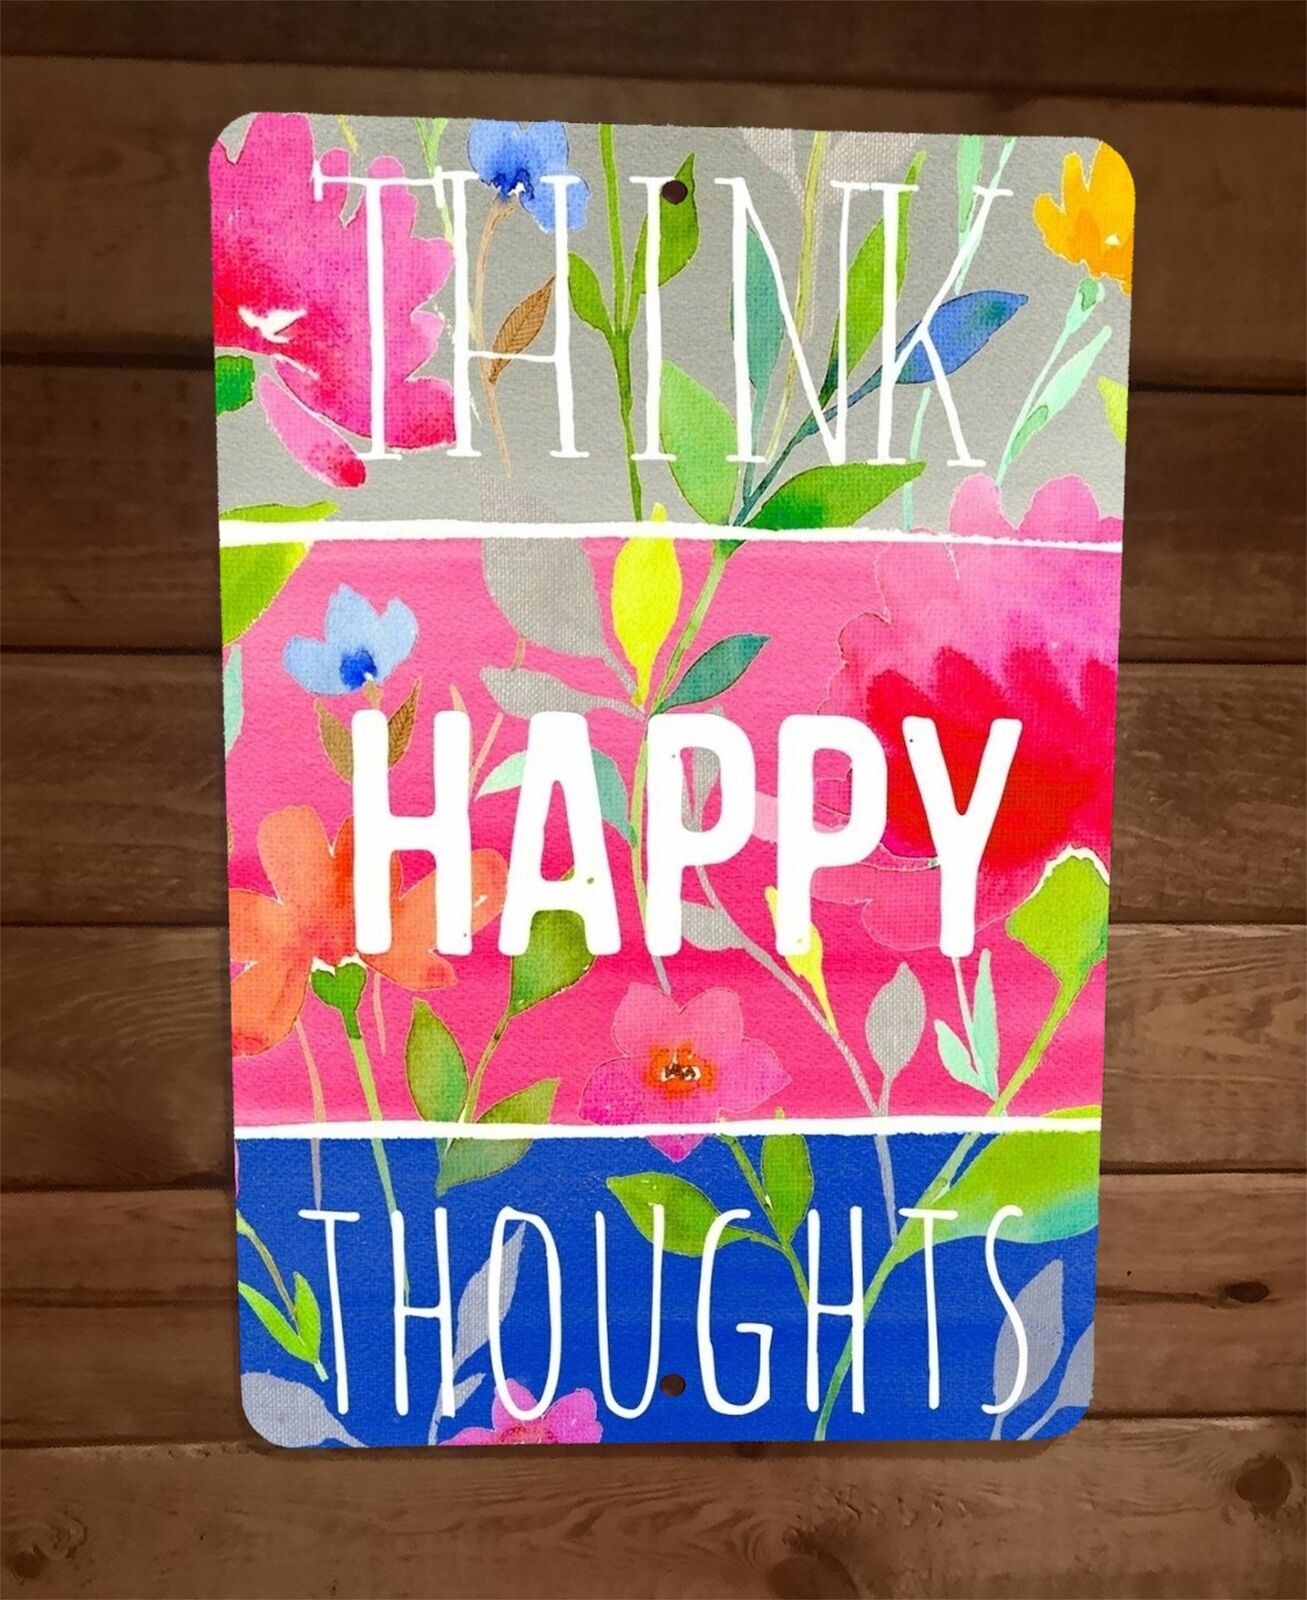 Think Happy Thoughts Phrase Motivational 8x12 Metal Wall Sign Poster